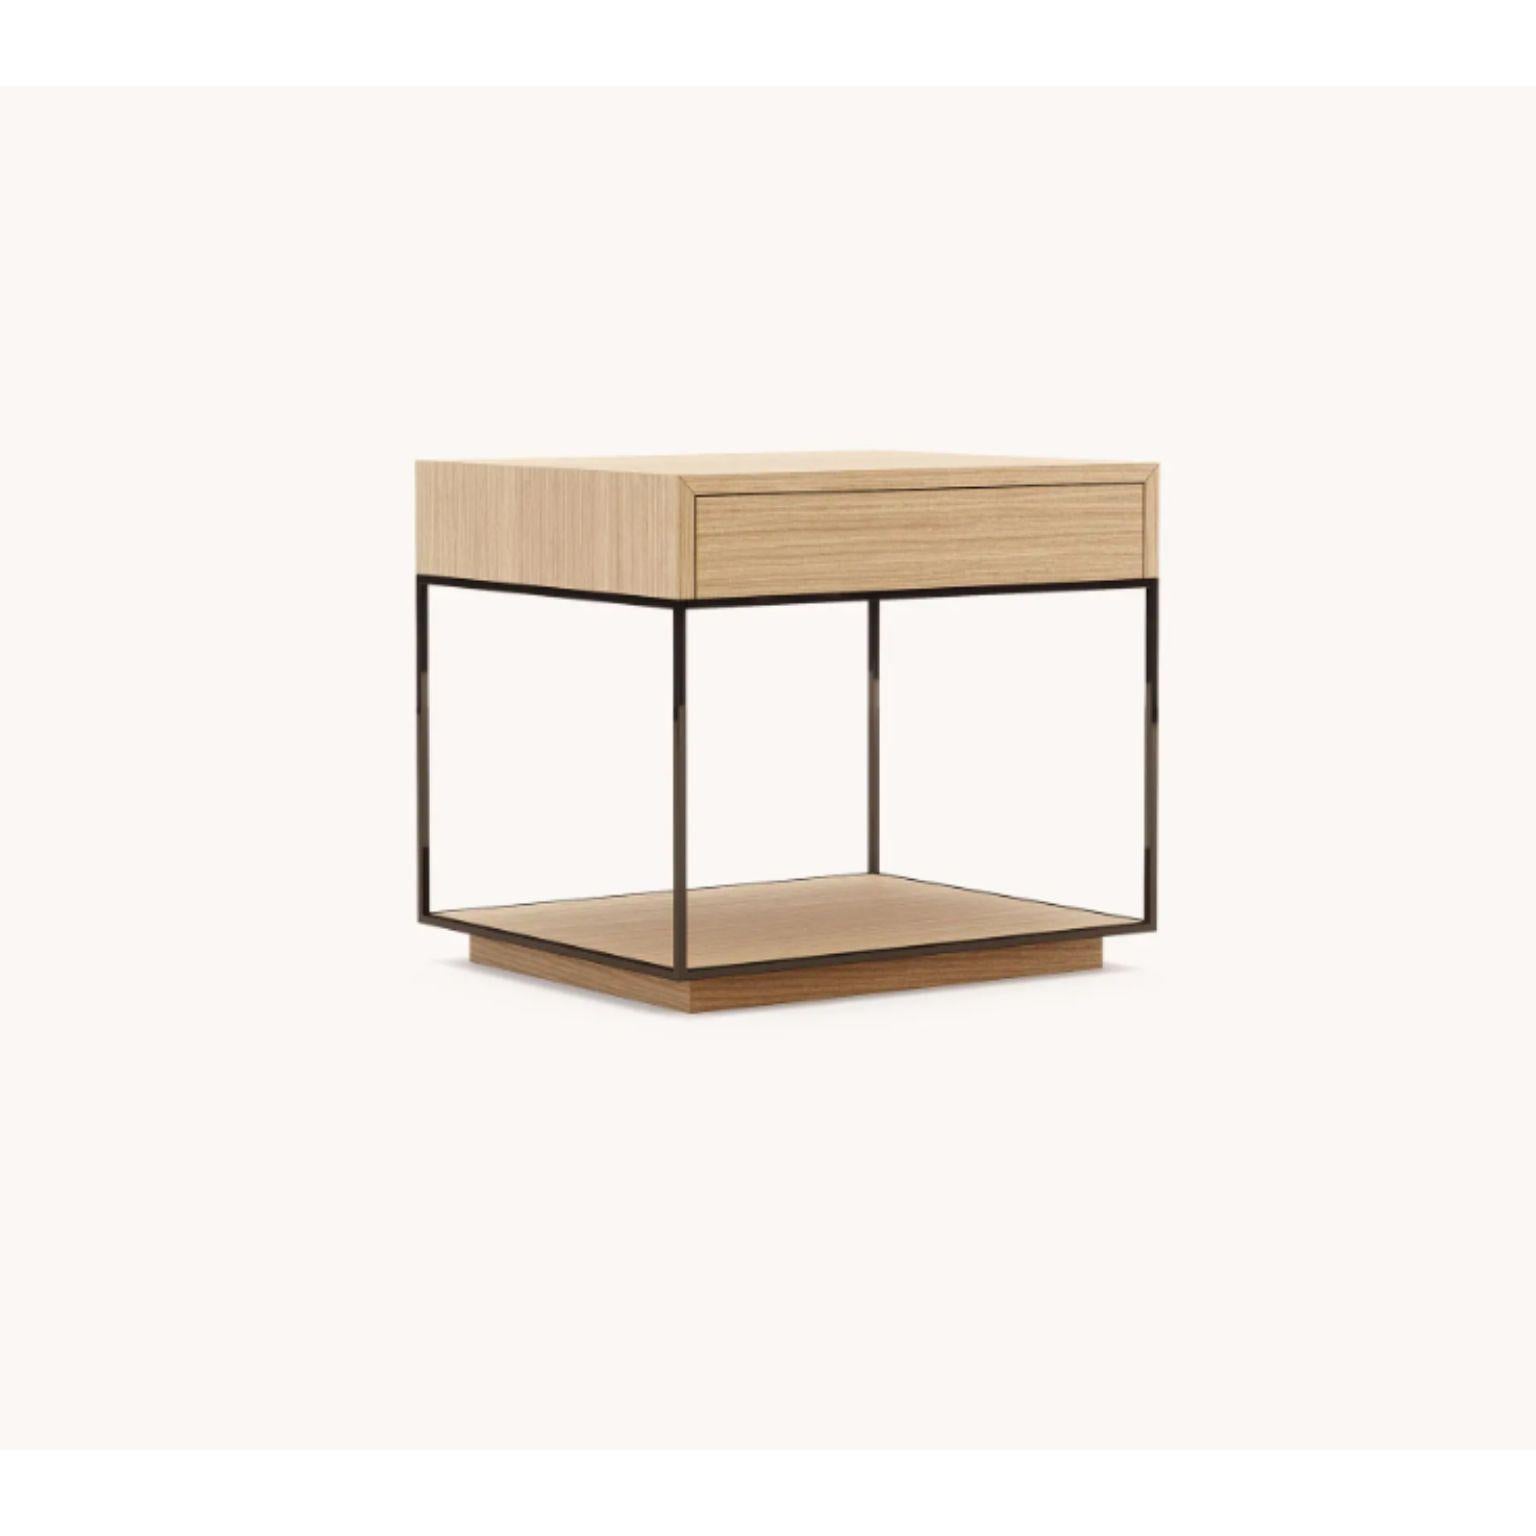 Grazi nightstand by Domkapa
Dimensions: W 60 x D 50 x H 53 cm.
Materials: Natural oak matte, smoky black polished. 
Also available in different materials.

Grazi nightstand is the best complimentary piece that you can place next to any bed